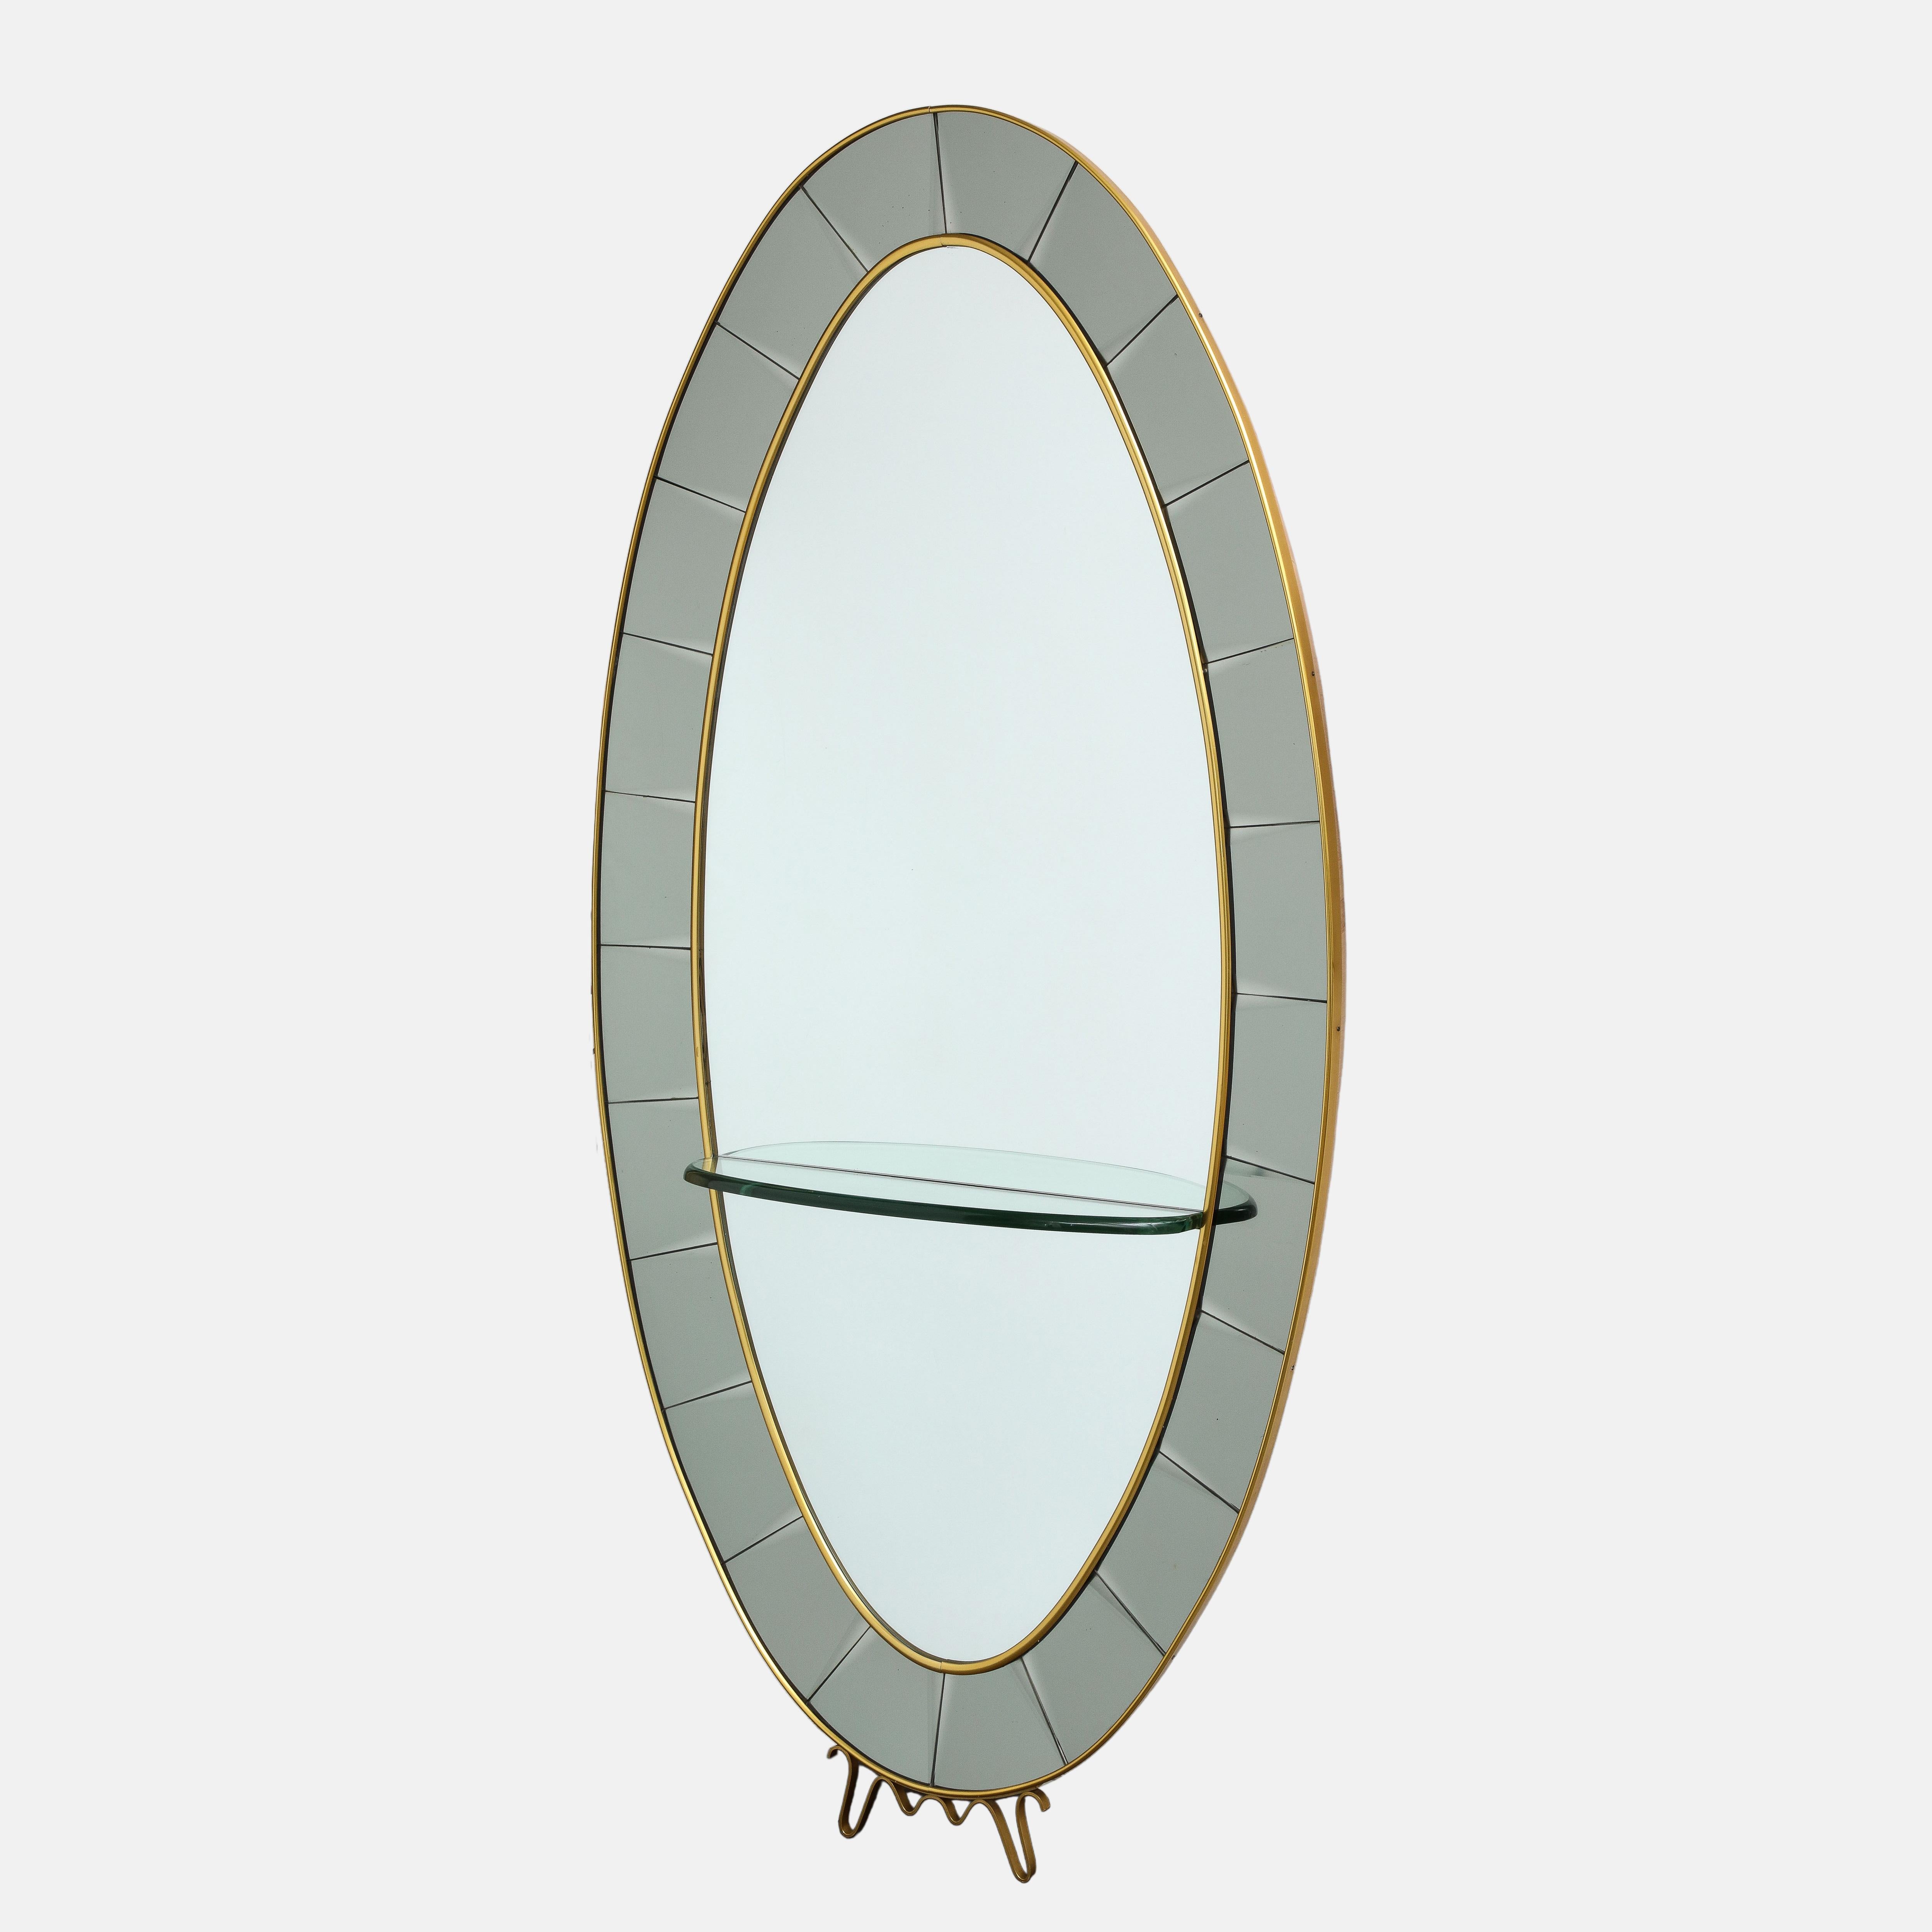 Cristal Art rare grand scale floor oval mirror model 2690 consisting of frame in hand-cut beveled colored crystal glass with gilt brass borders and lovely scroll detail below with thick clear crystal polished glass curved shelf. This exquisite and